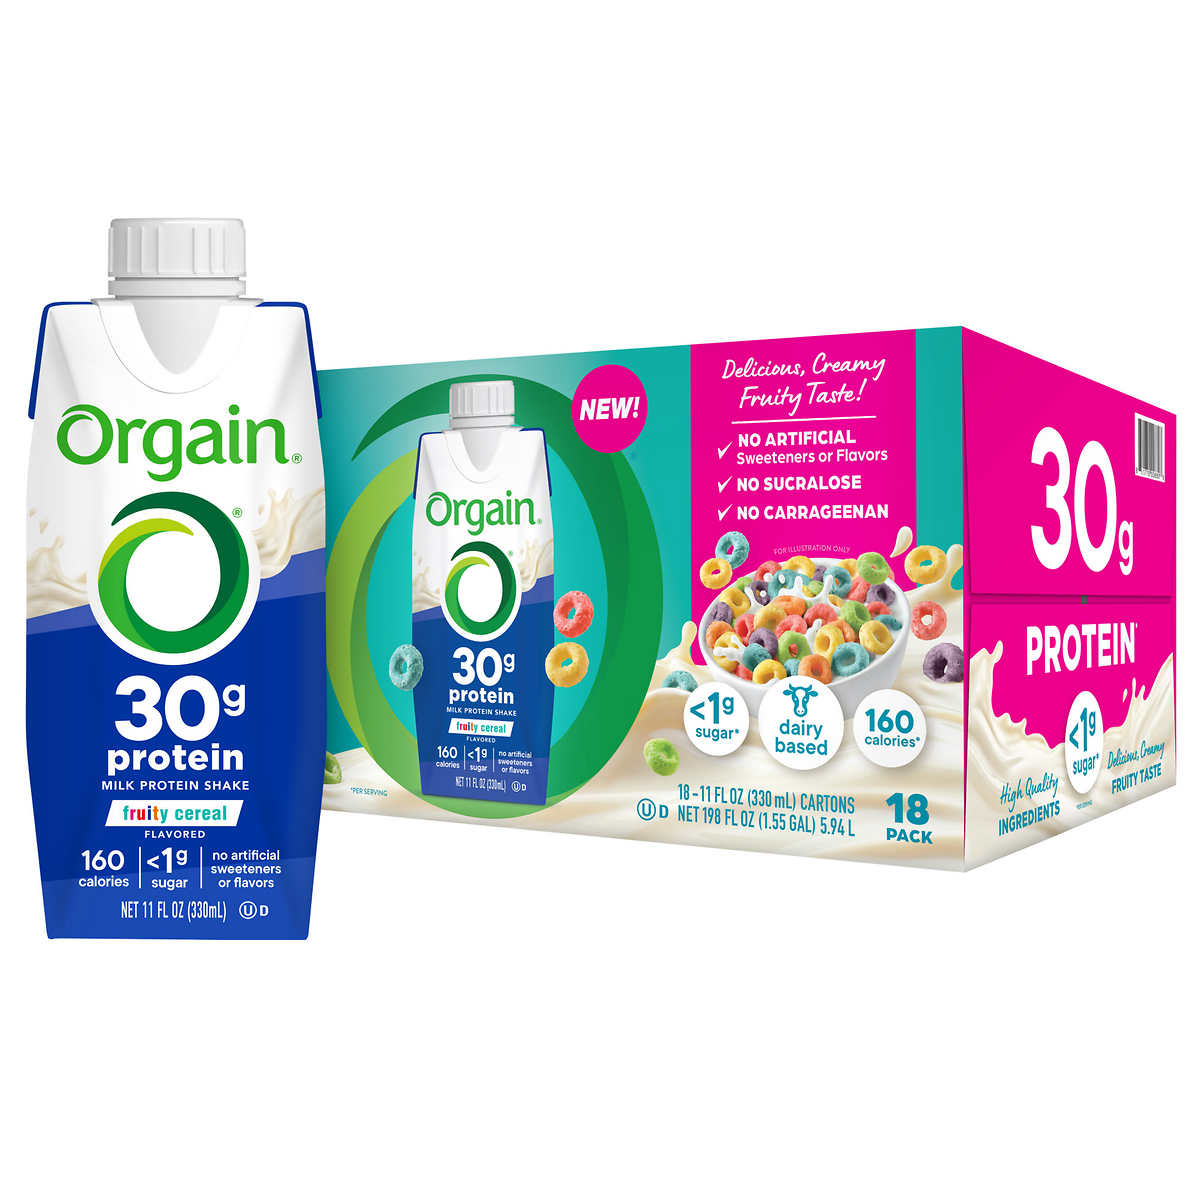 Orgain 30g Milk Protein Shake, Fruity Cereal, 11 Fluid Ounce (Pack Of 18)